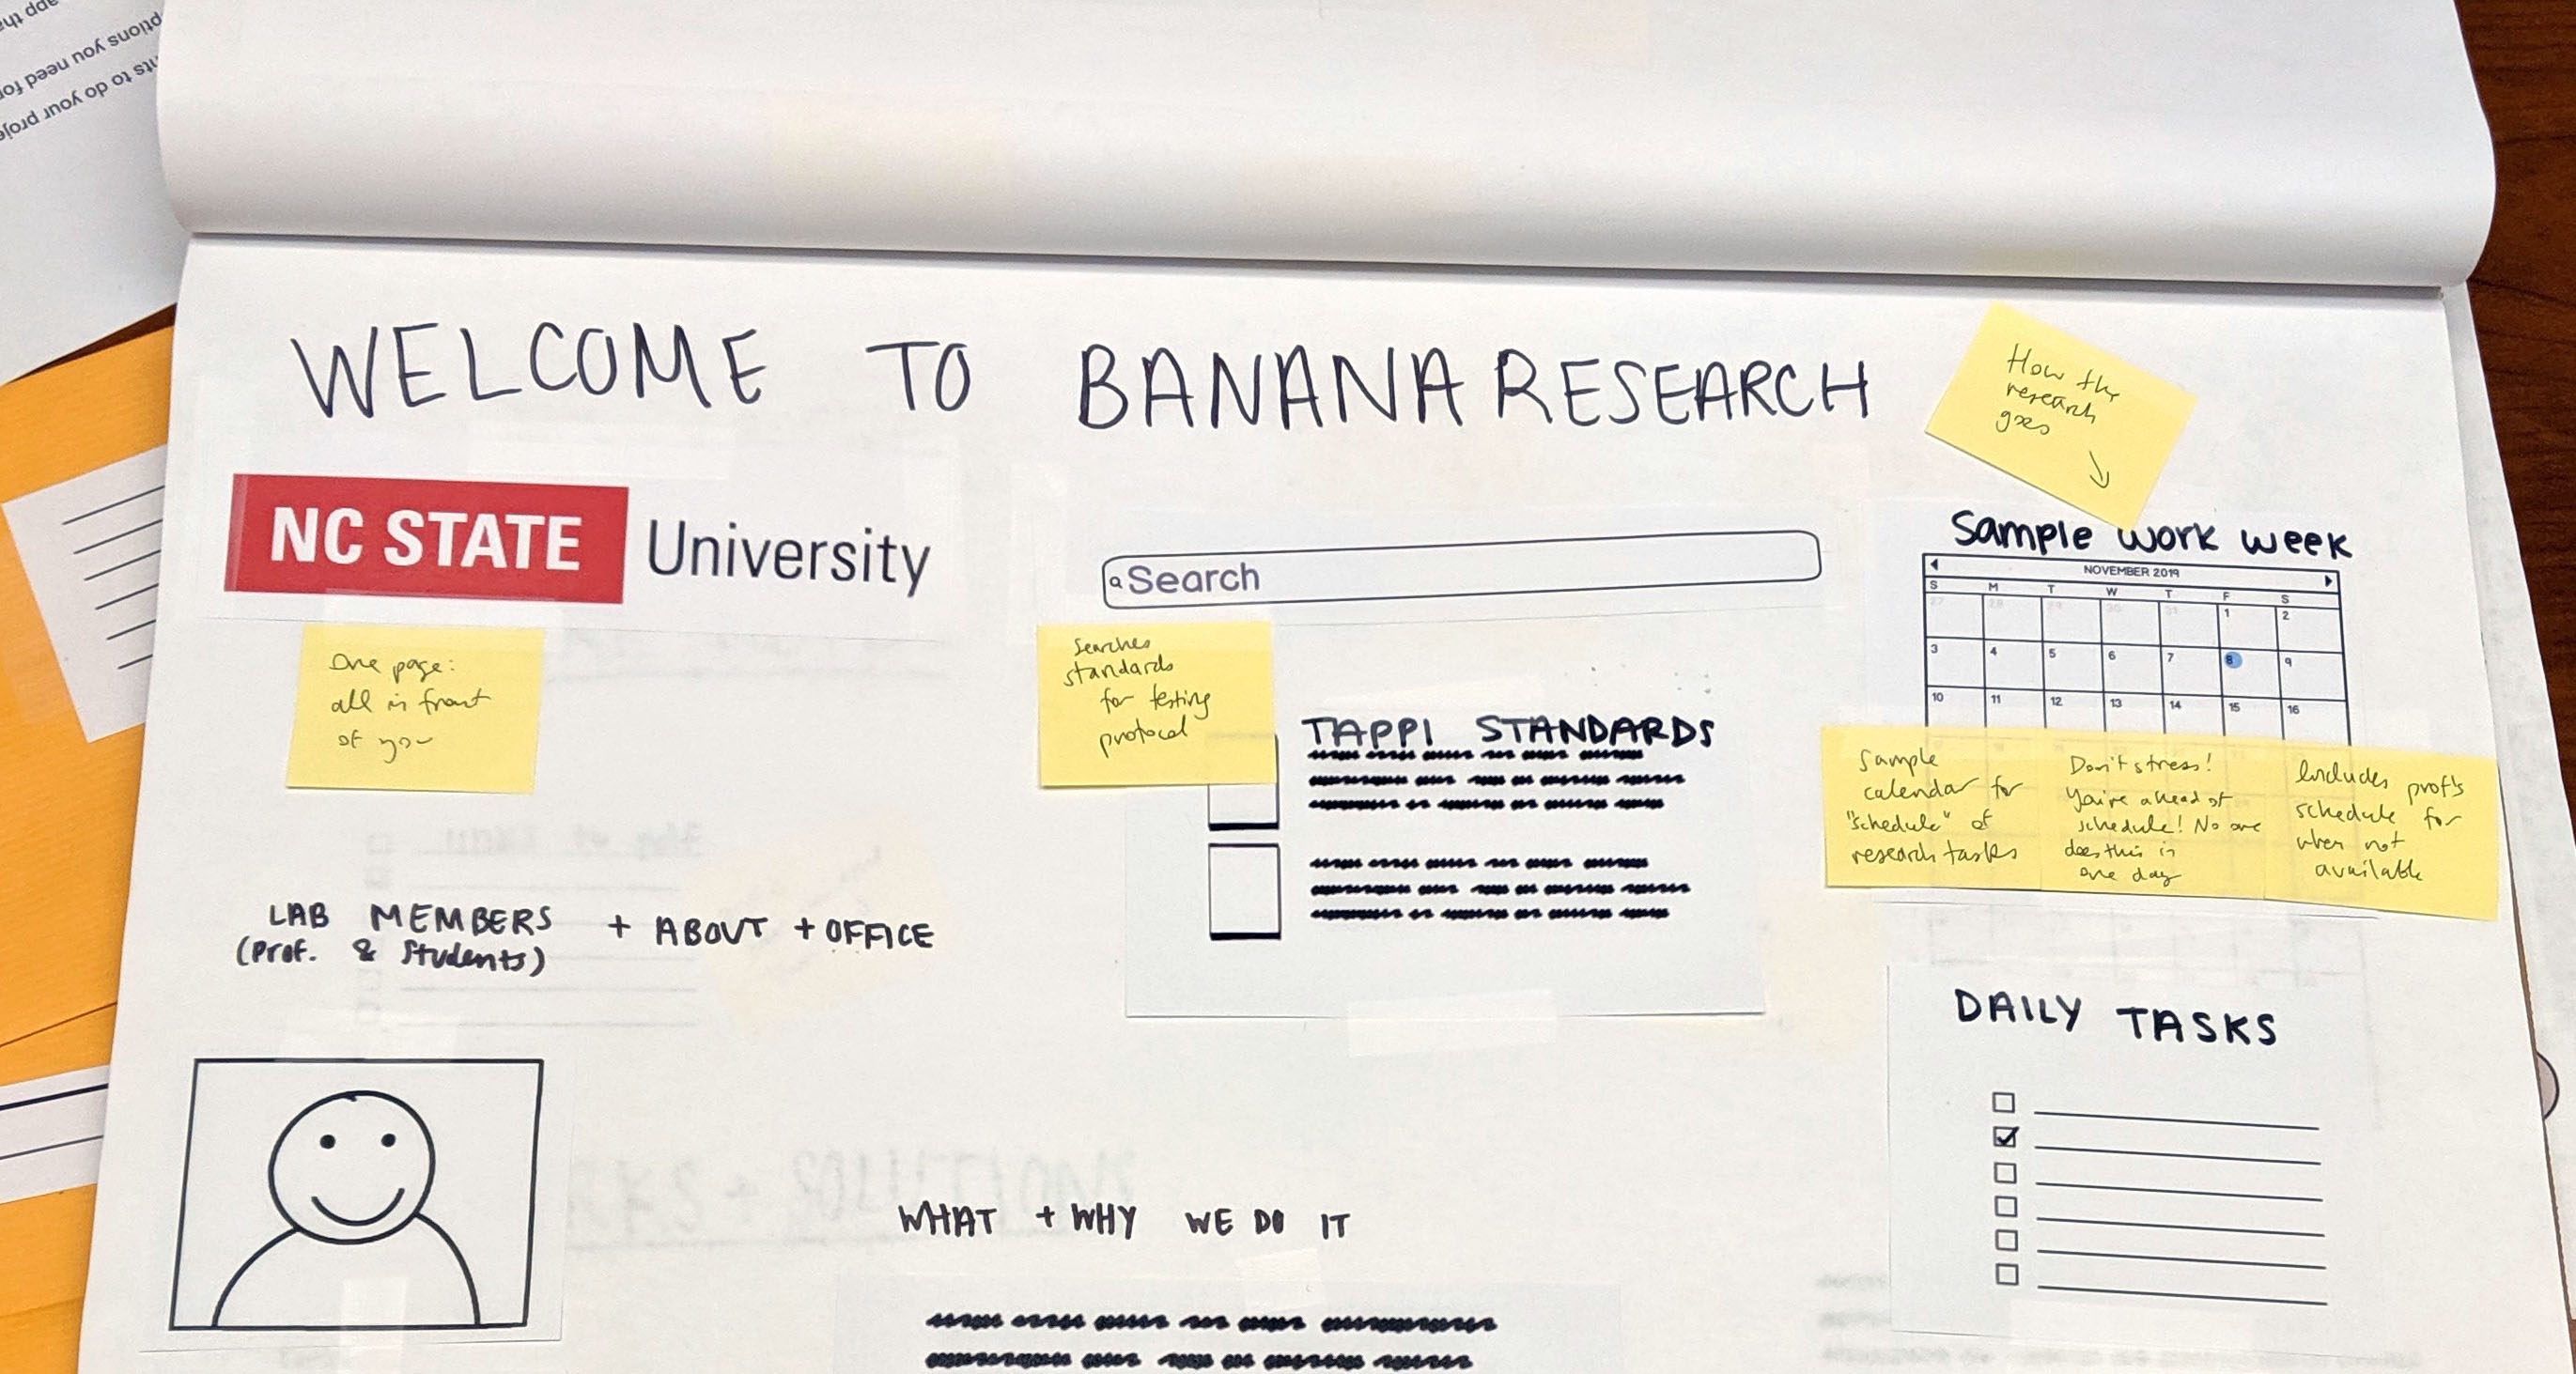 Sketchy prototype of a web page on a piece of paper. The title is Banana Research, and the page includes a search box, introductory text, and a happy face